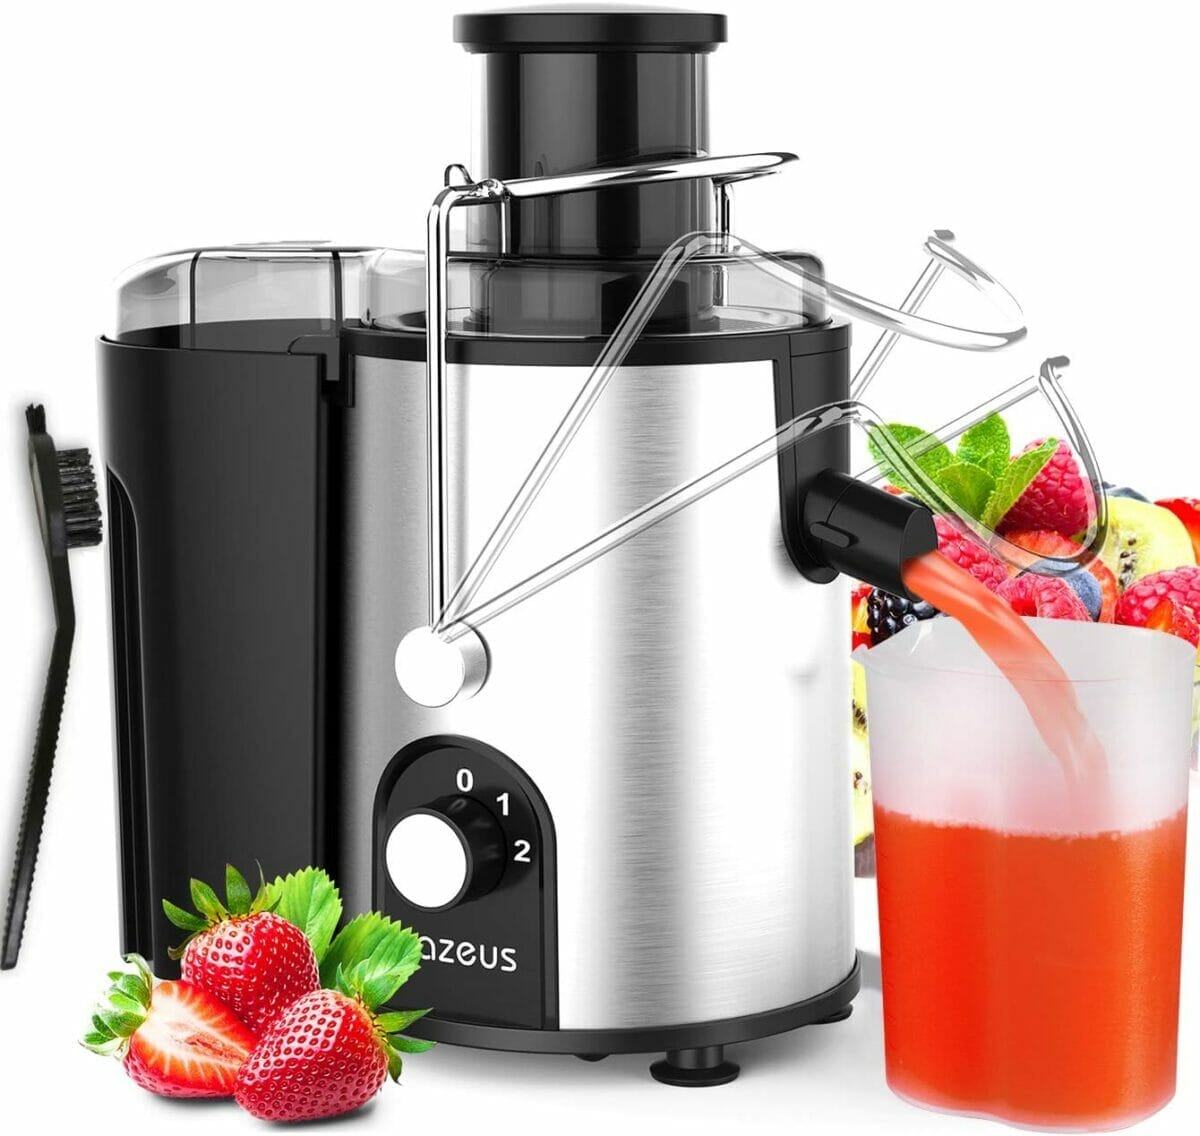 The 6 Best Juicers Under $100 - Buying Guide 3